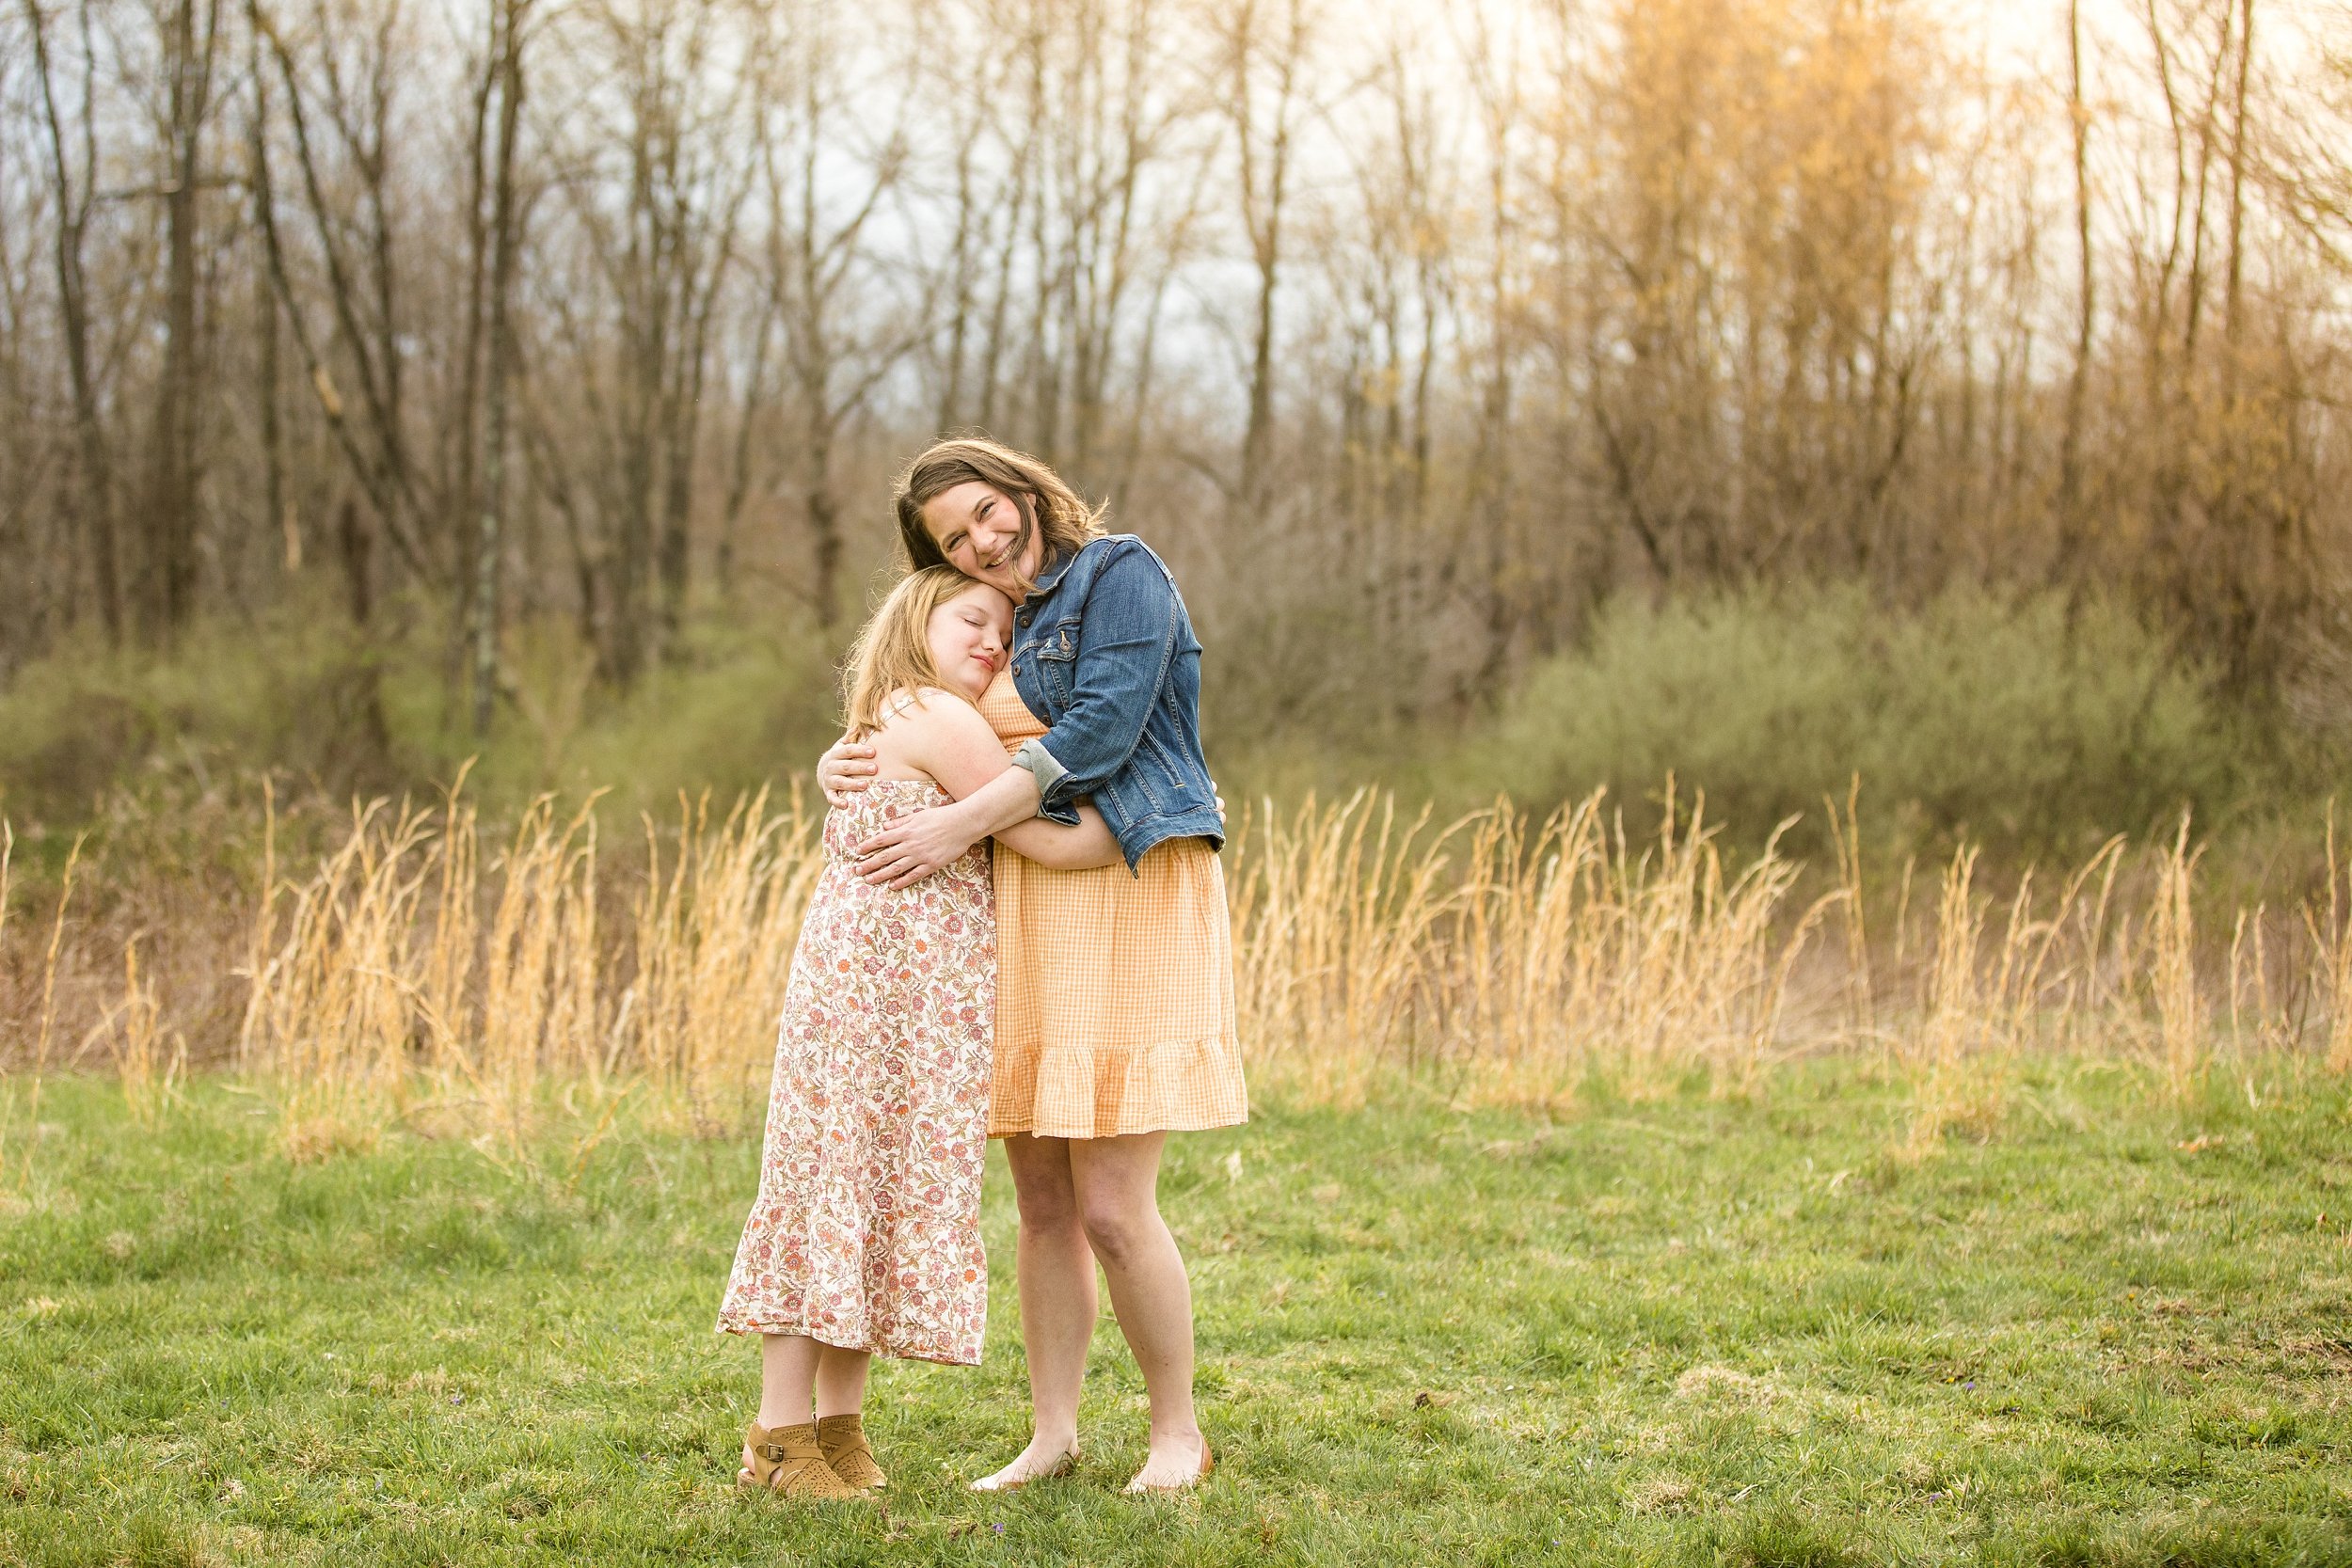 cranberry township family photographer, spring mini sessions pittsburgh, zelienople family photographer, wexford family photographer, pittsburgh family photographer